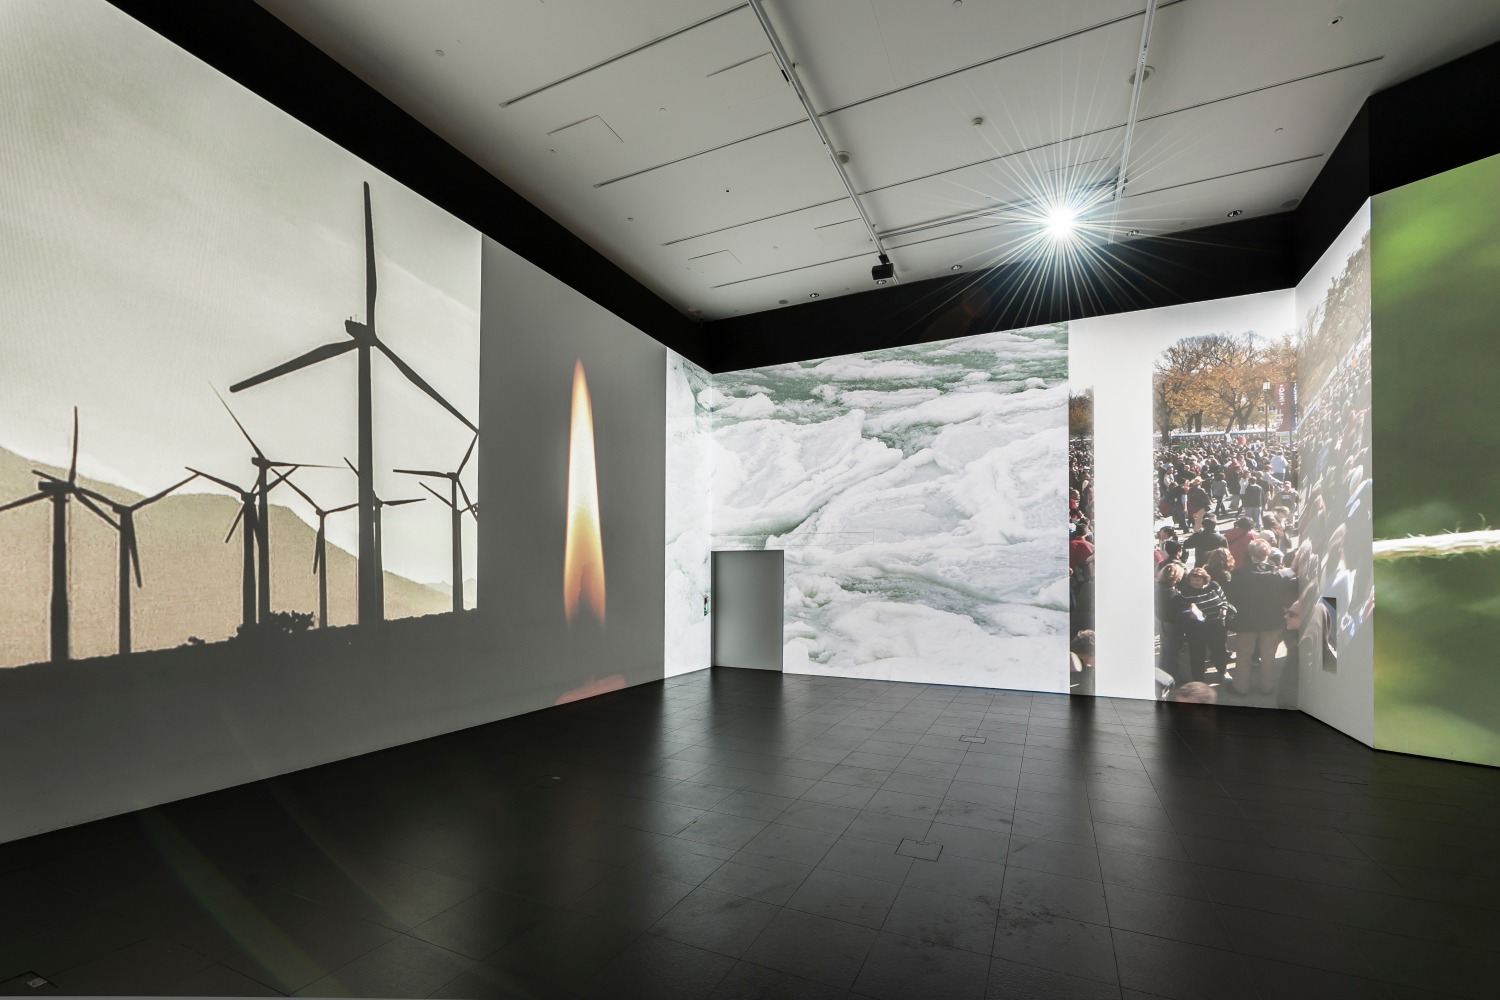 Charles Atlas
Glacier
Installation view
Bloomberg Space, London, 2013